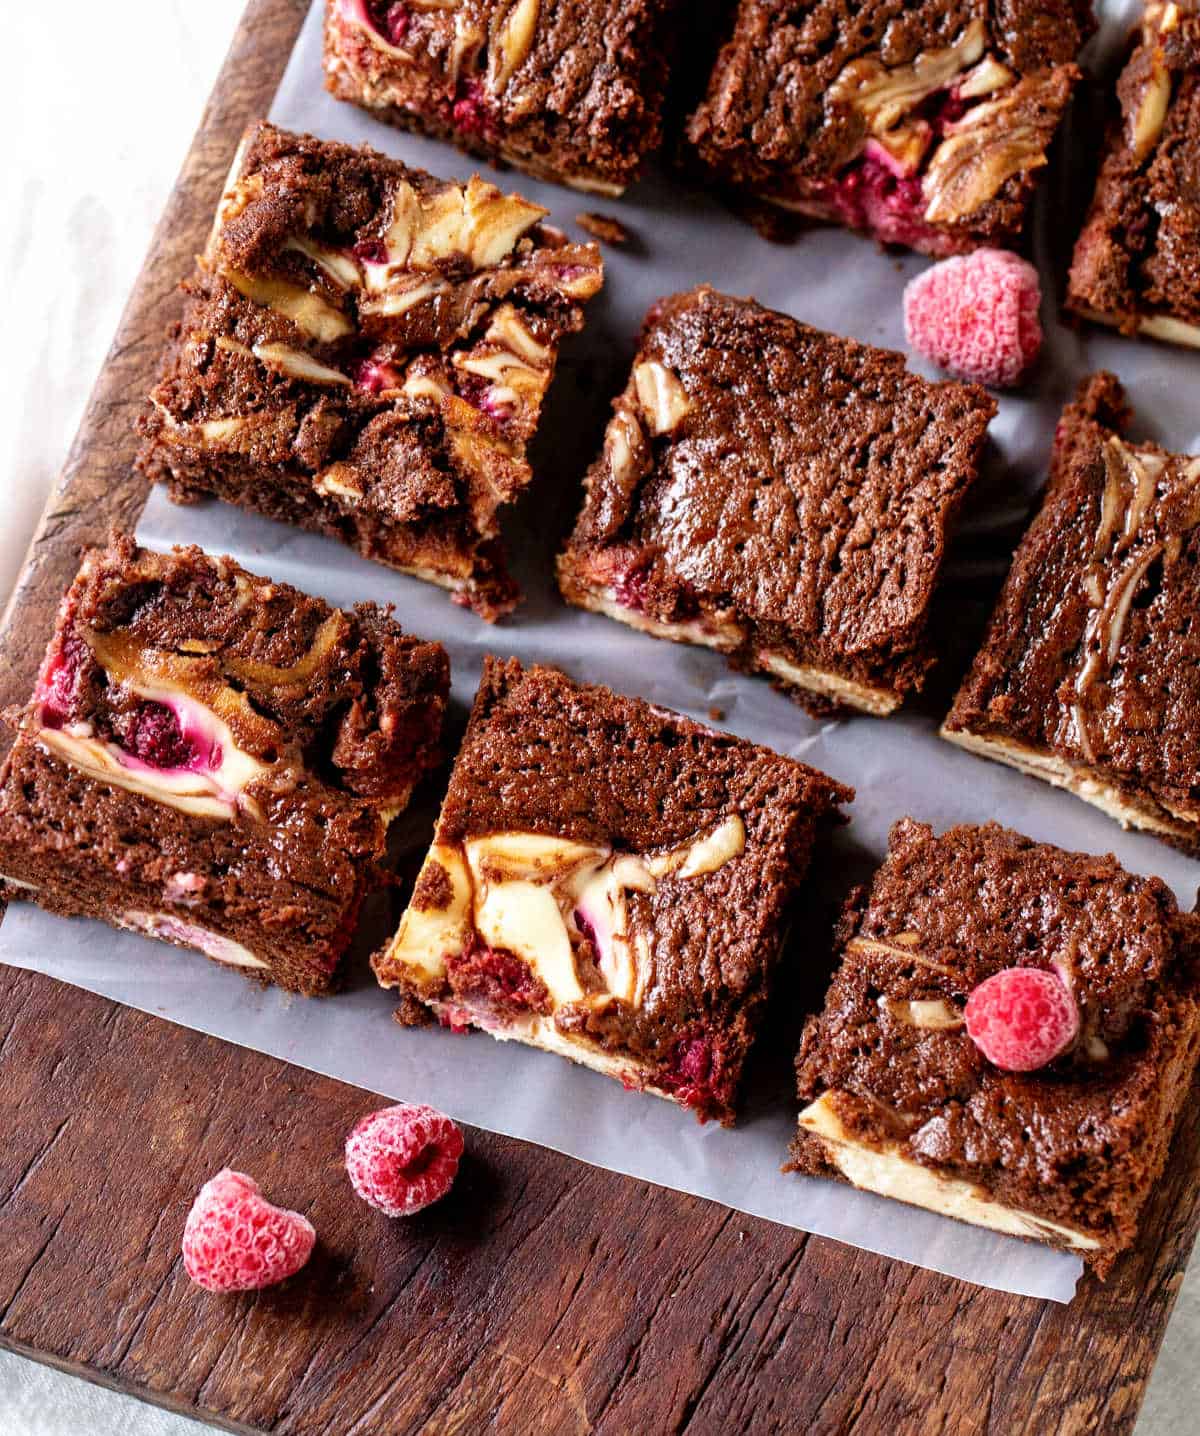 Wooden board with three rows of cheesecake brownies with raspberries.